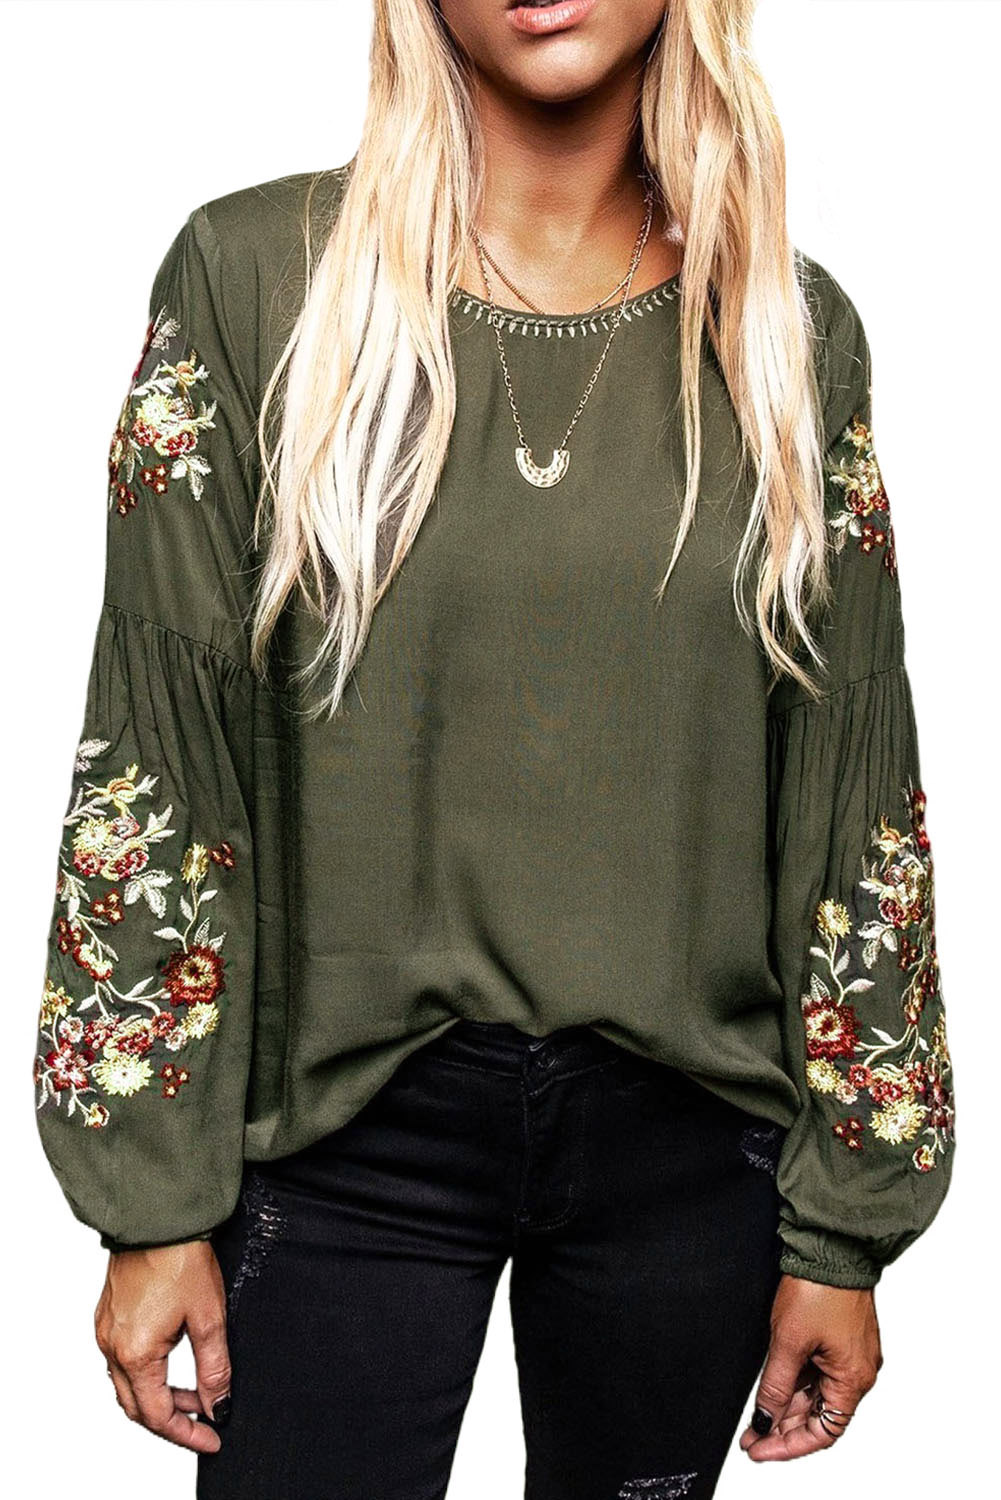 $9.7 Green Floral Embroidery Long Sleeve Top, Long Sleeve Tops Wholesale